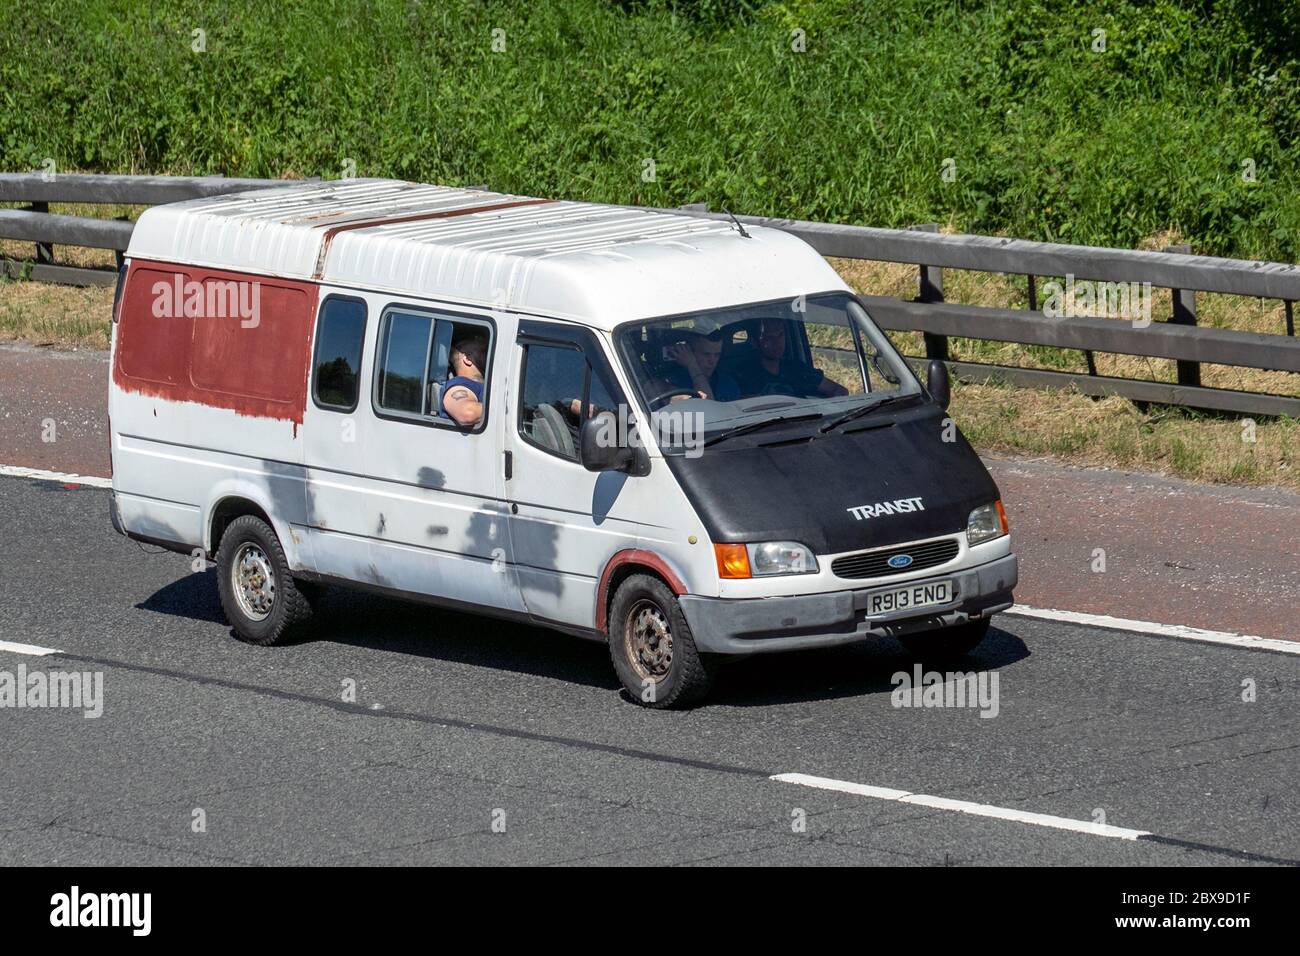 1998 90s Ford Transit 190 LWB Rusty old white van; Vehicular traffic moving vehicles, cars driving vehicle on UK roads, modified 90s motors, motoring on the M6 motorway Stock Photo